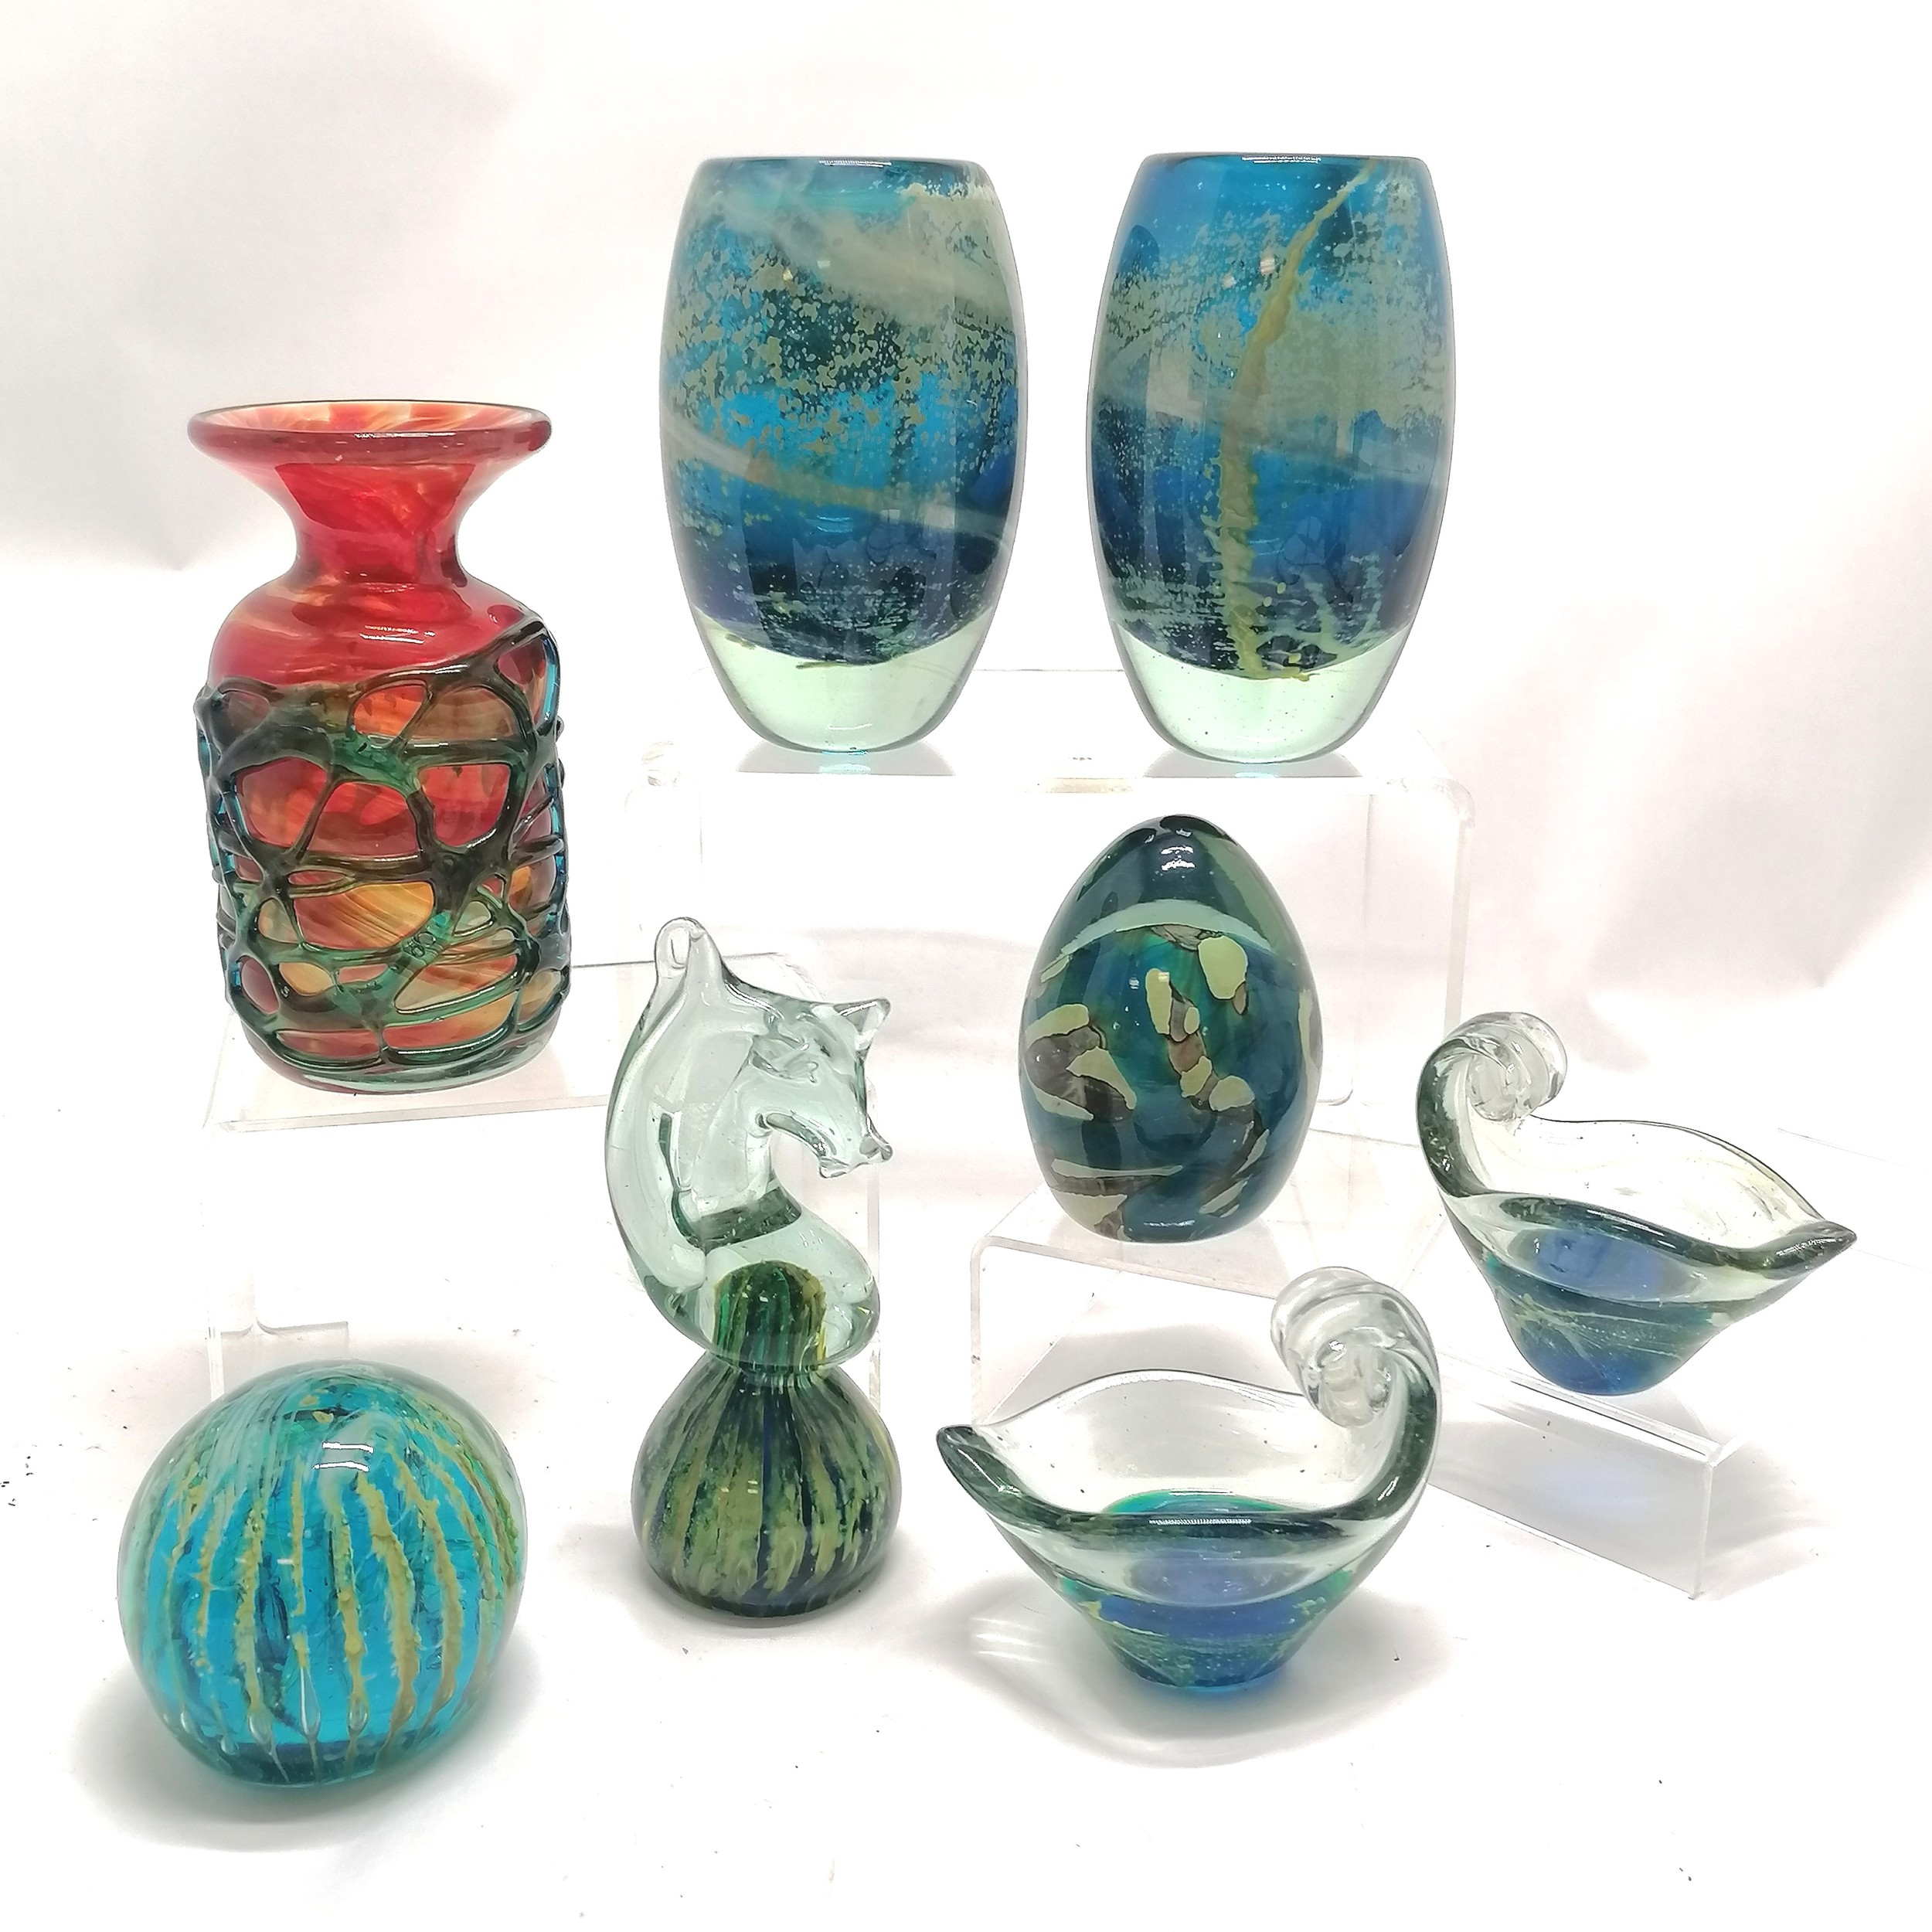 8 x Mdina art glass items incl. a red overlay detail vase (14.5 cm high), seahorse paperweight etc ~